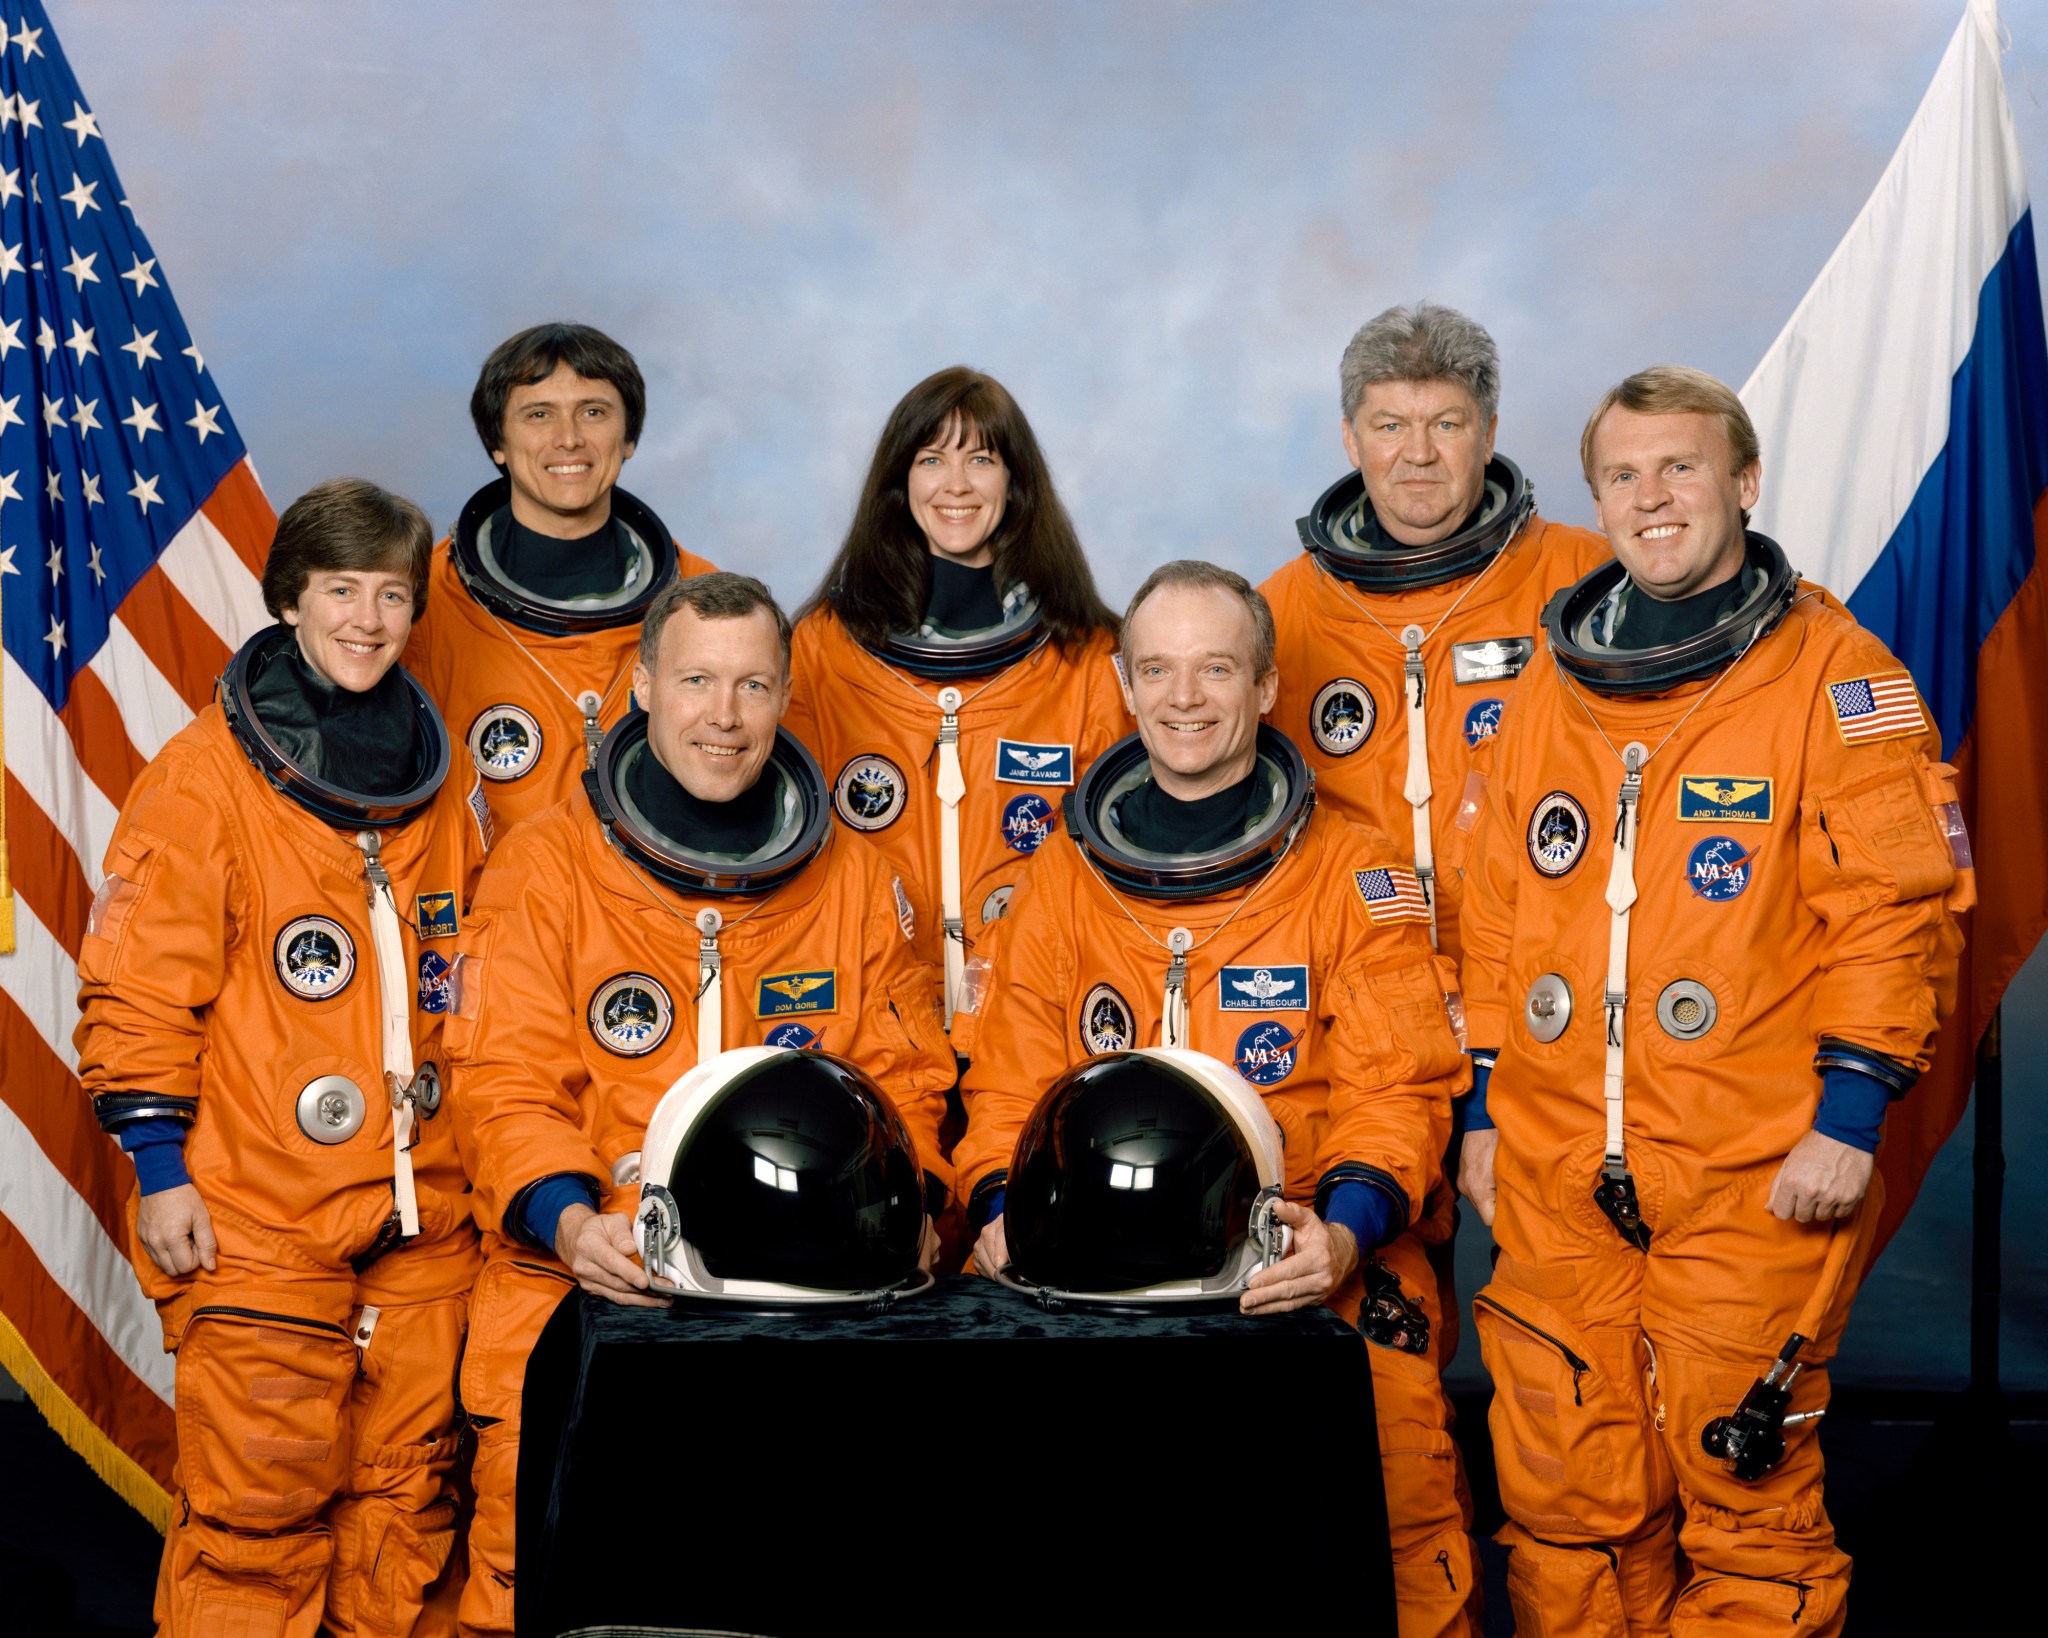 STS-91 crew portrait with the crewmembers pictured in their orange Advanced Crew Escape Suits.